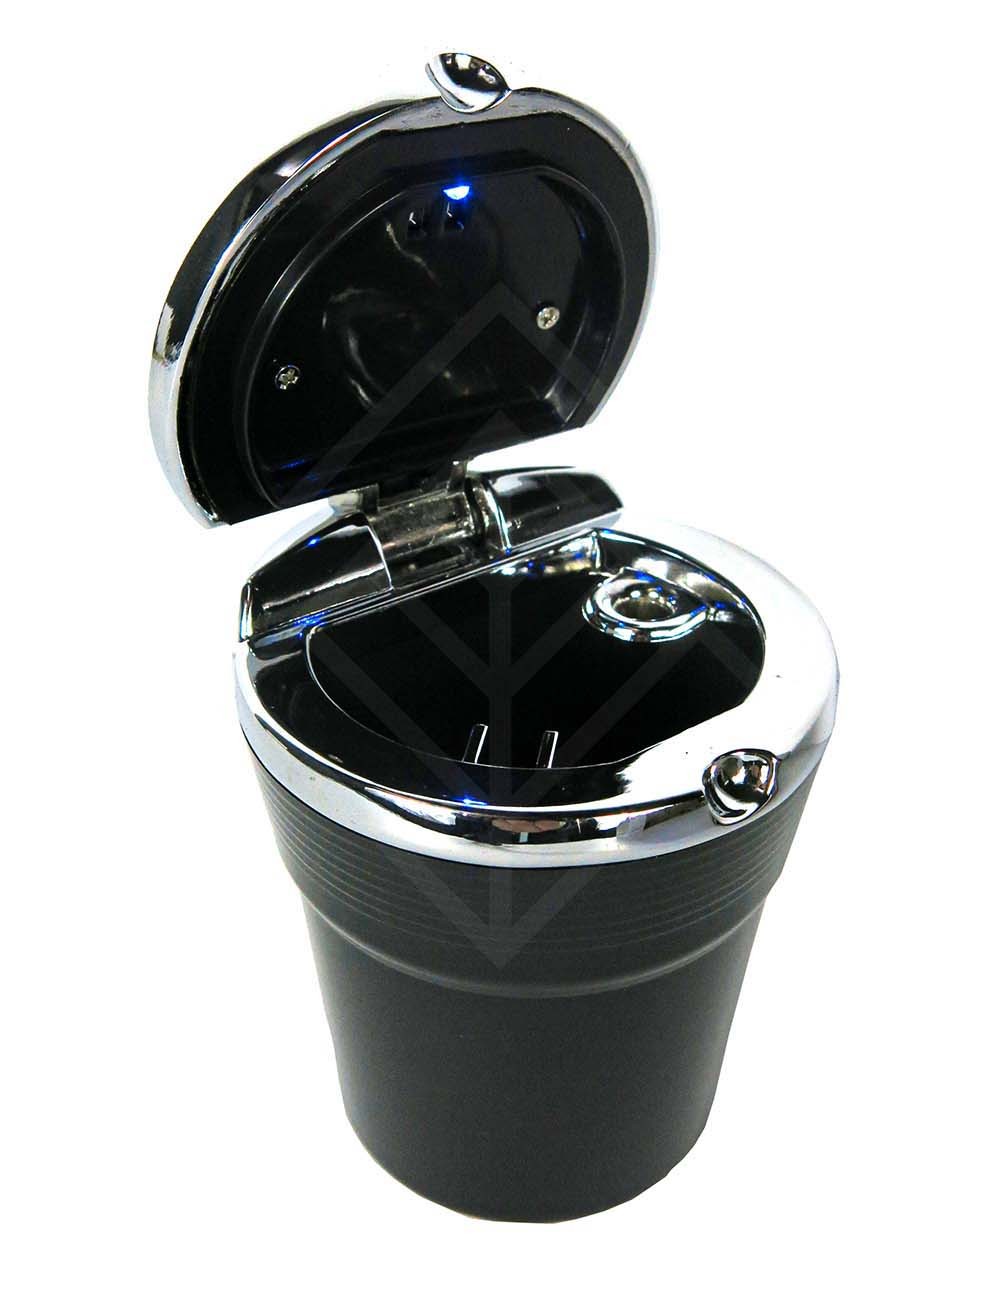 Scrumiera for cup holder in car black with LED lamp